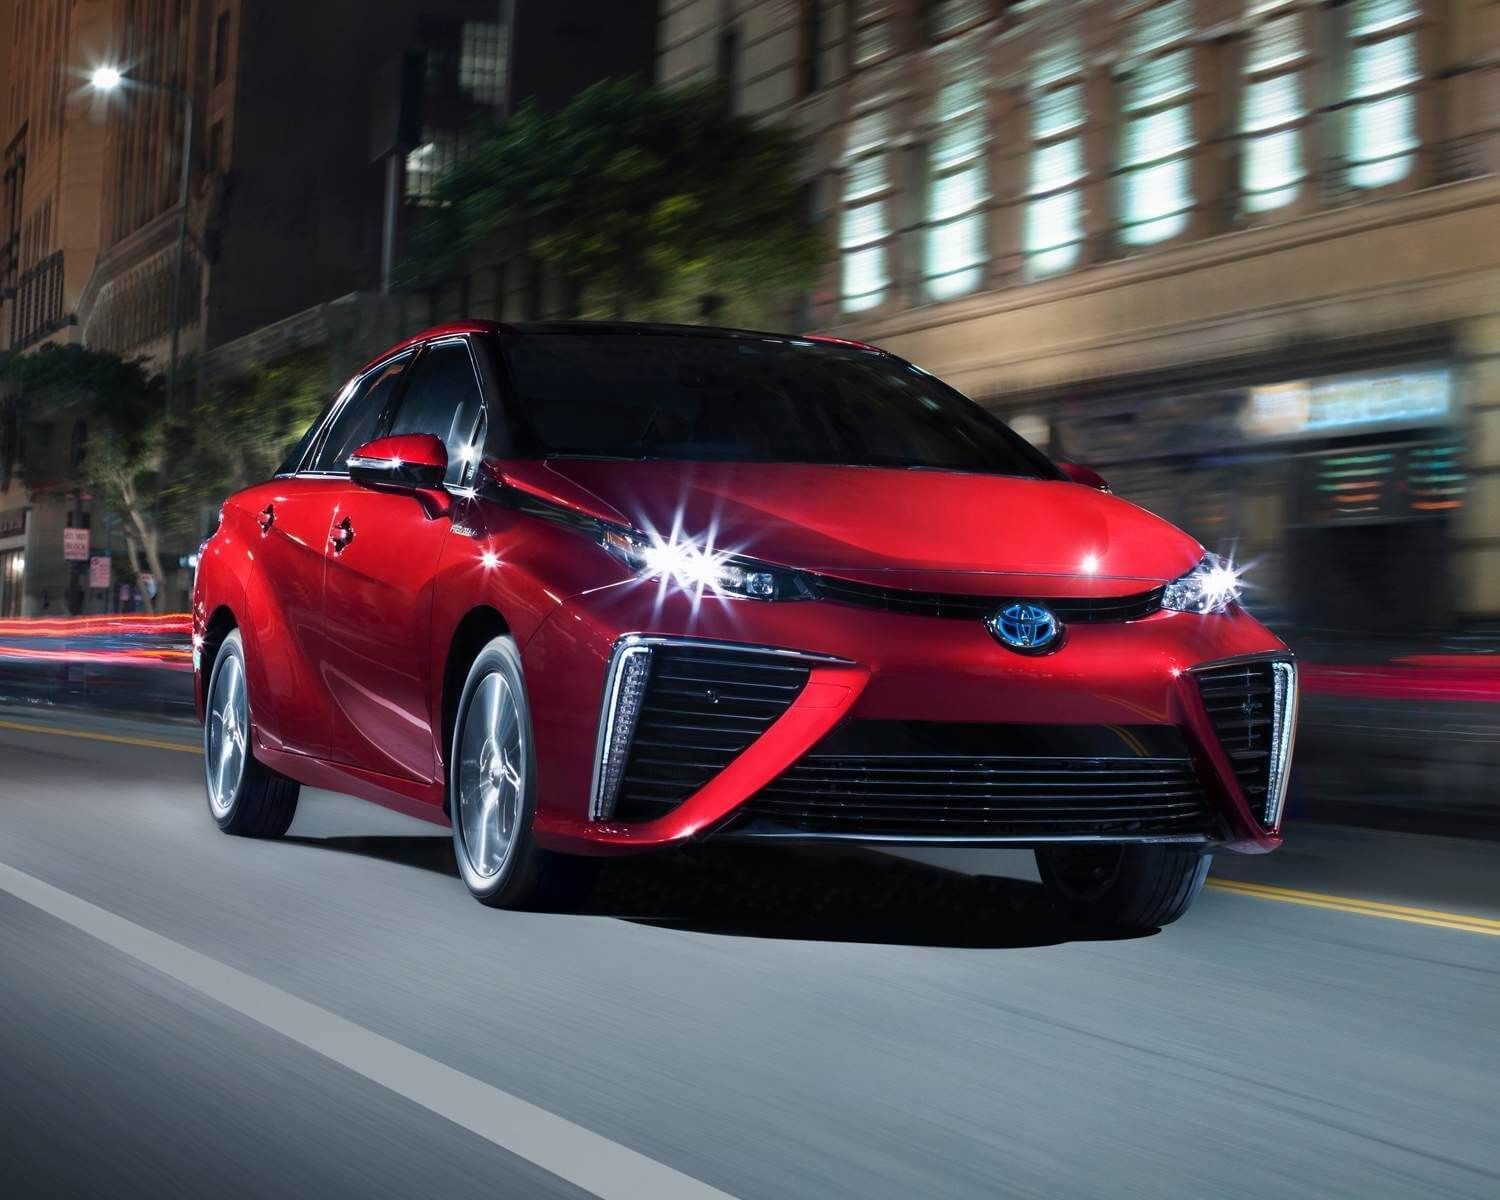 Front 3/4 view of a red 2020 Toyota Mirai hydrogen car being driven on a city boulevard